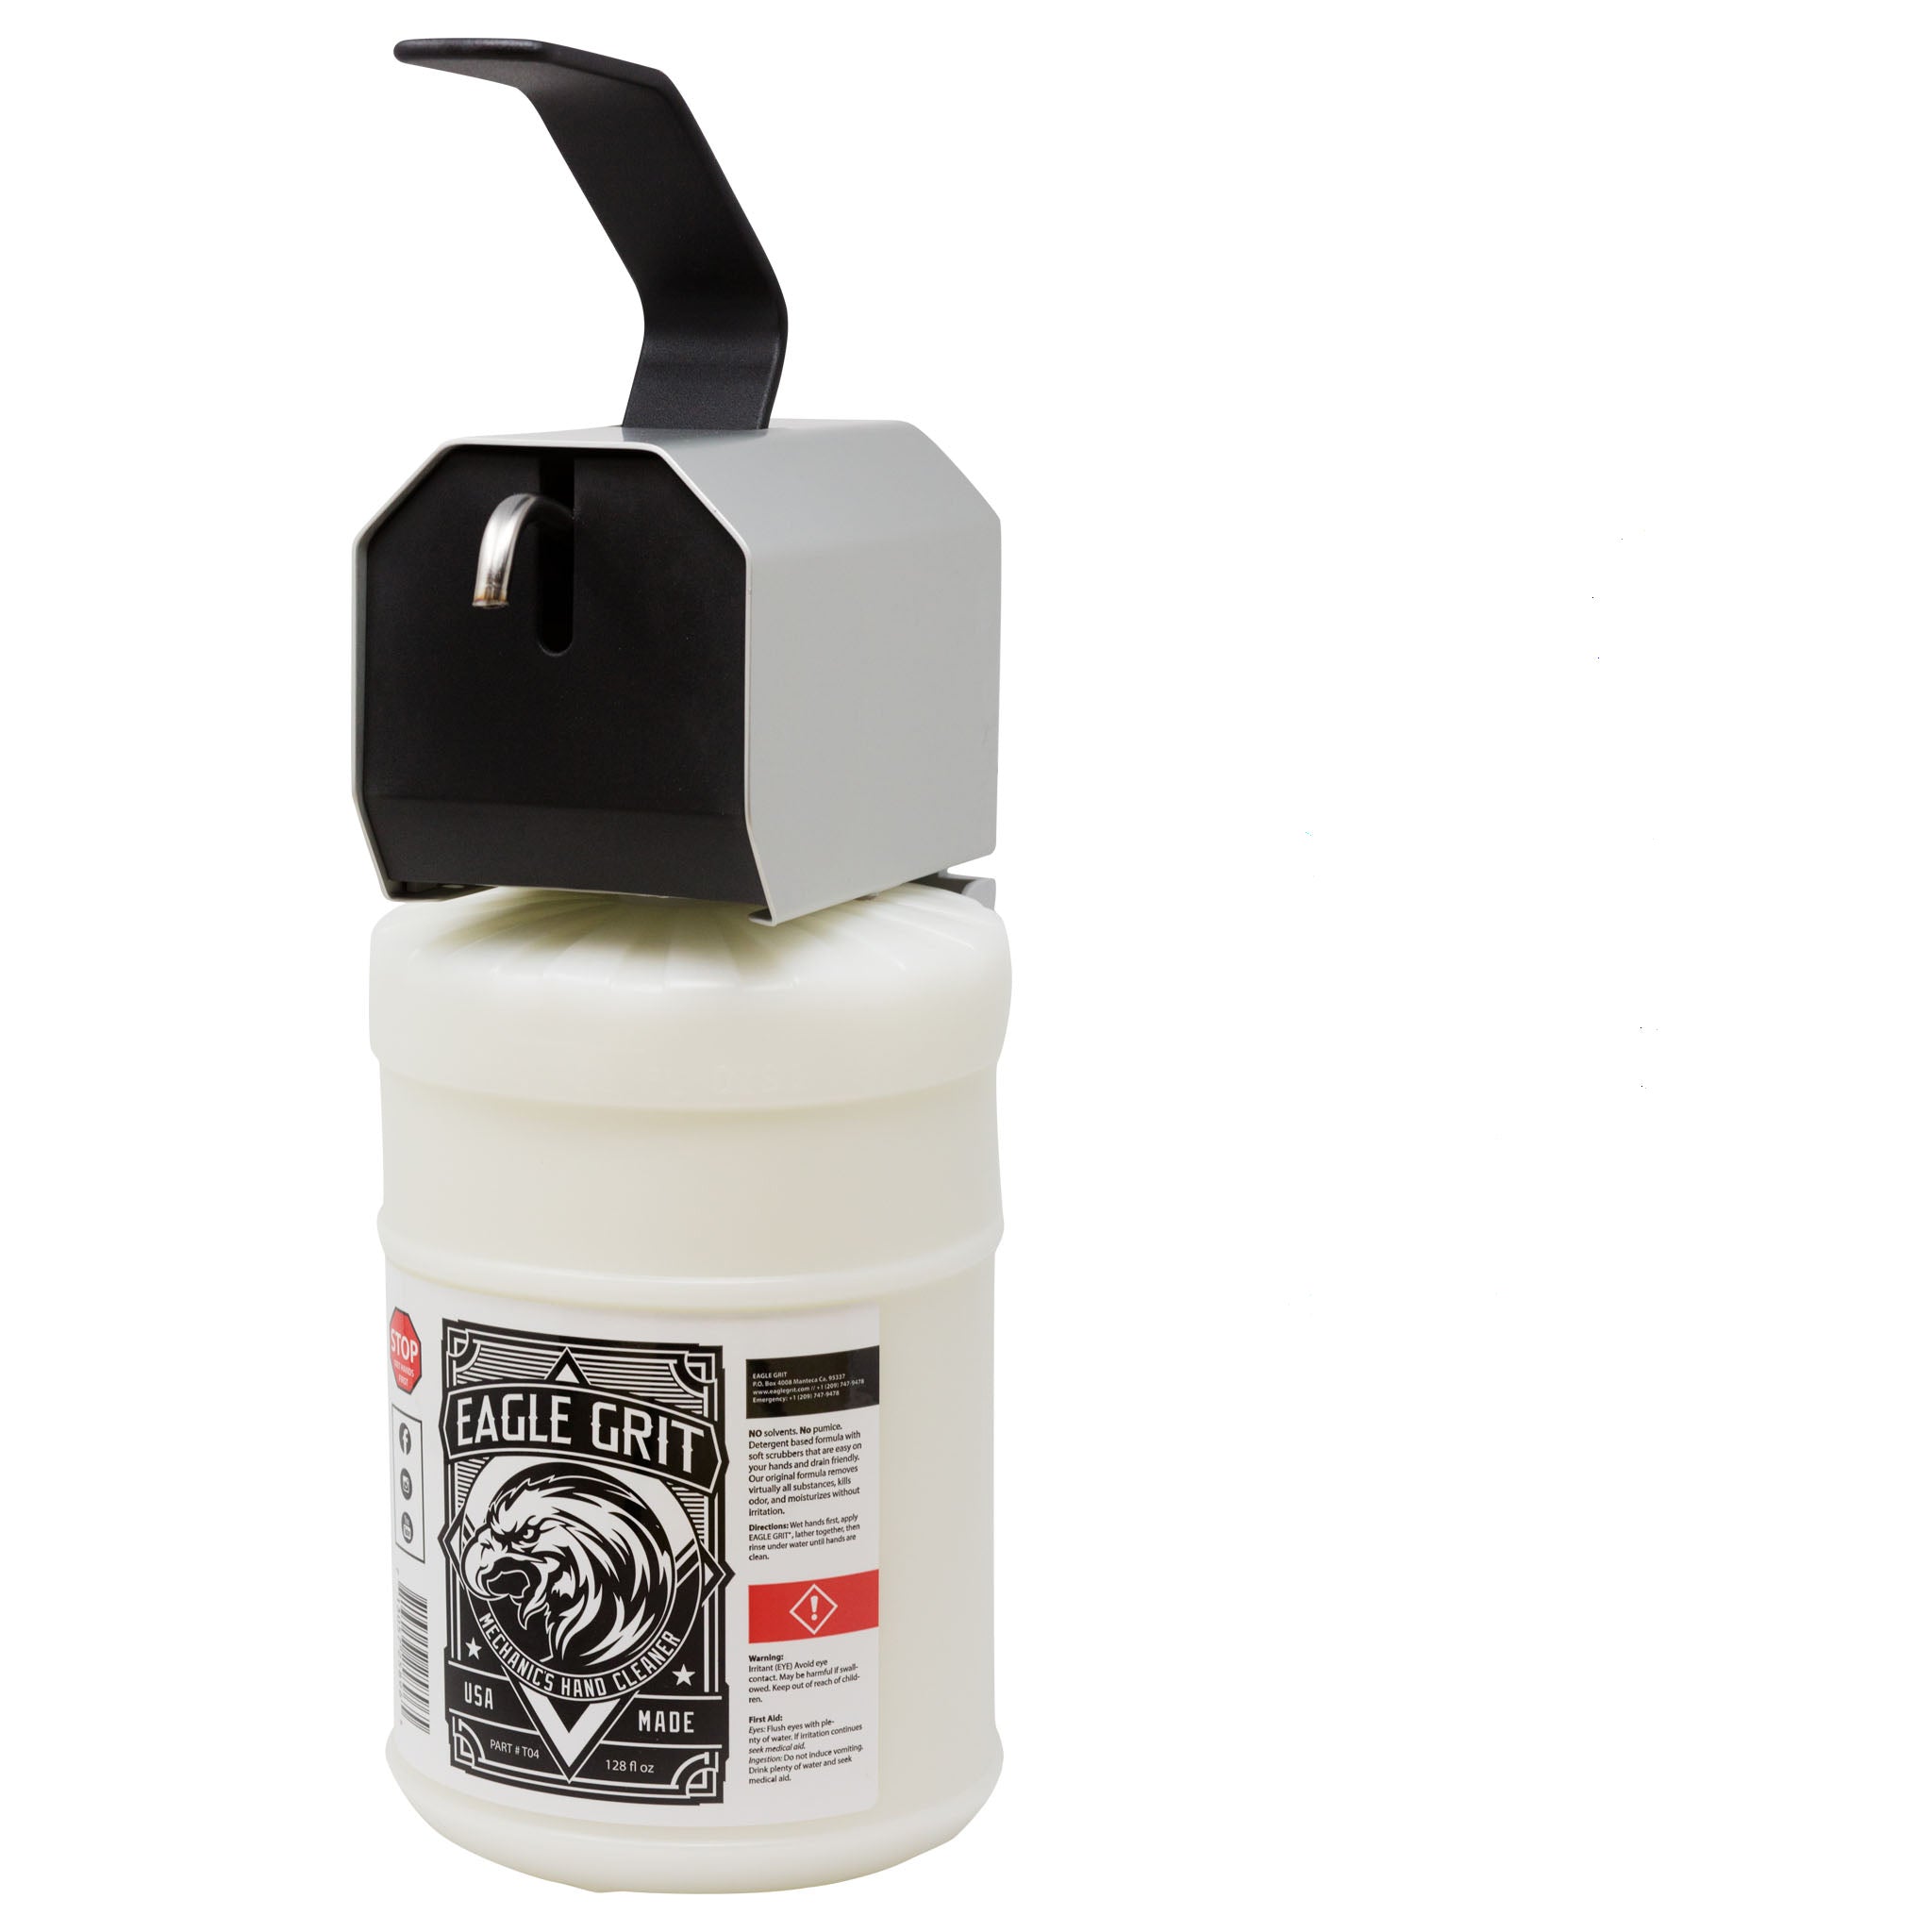 Govets | Qty 4 | Detco 1 Gal Pump Bottle Hand Cleaner with Grit